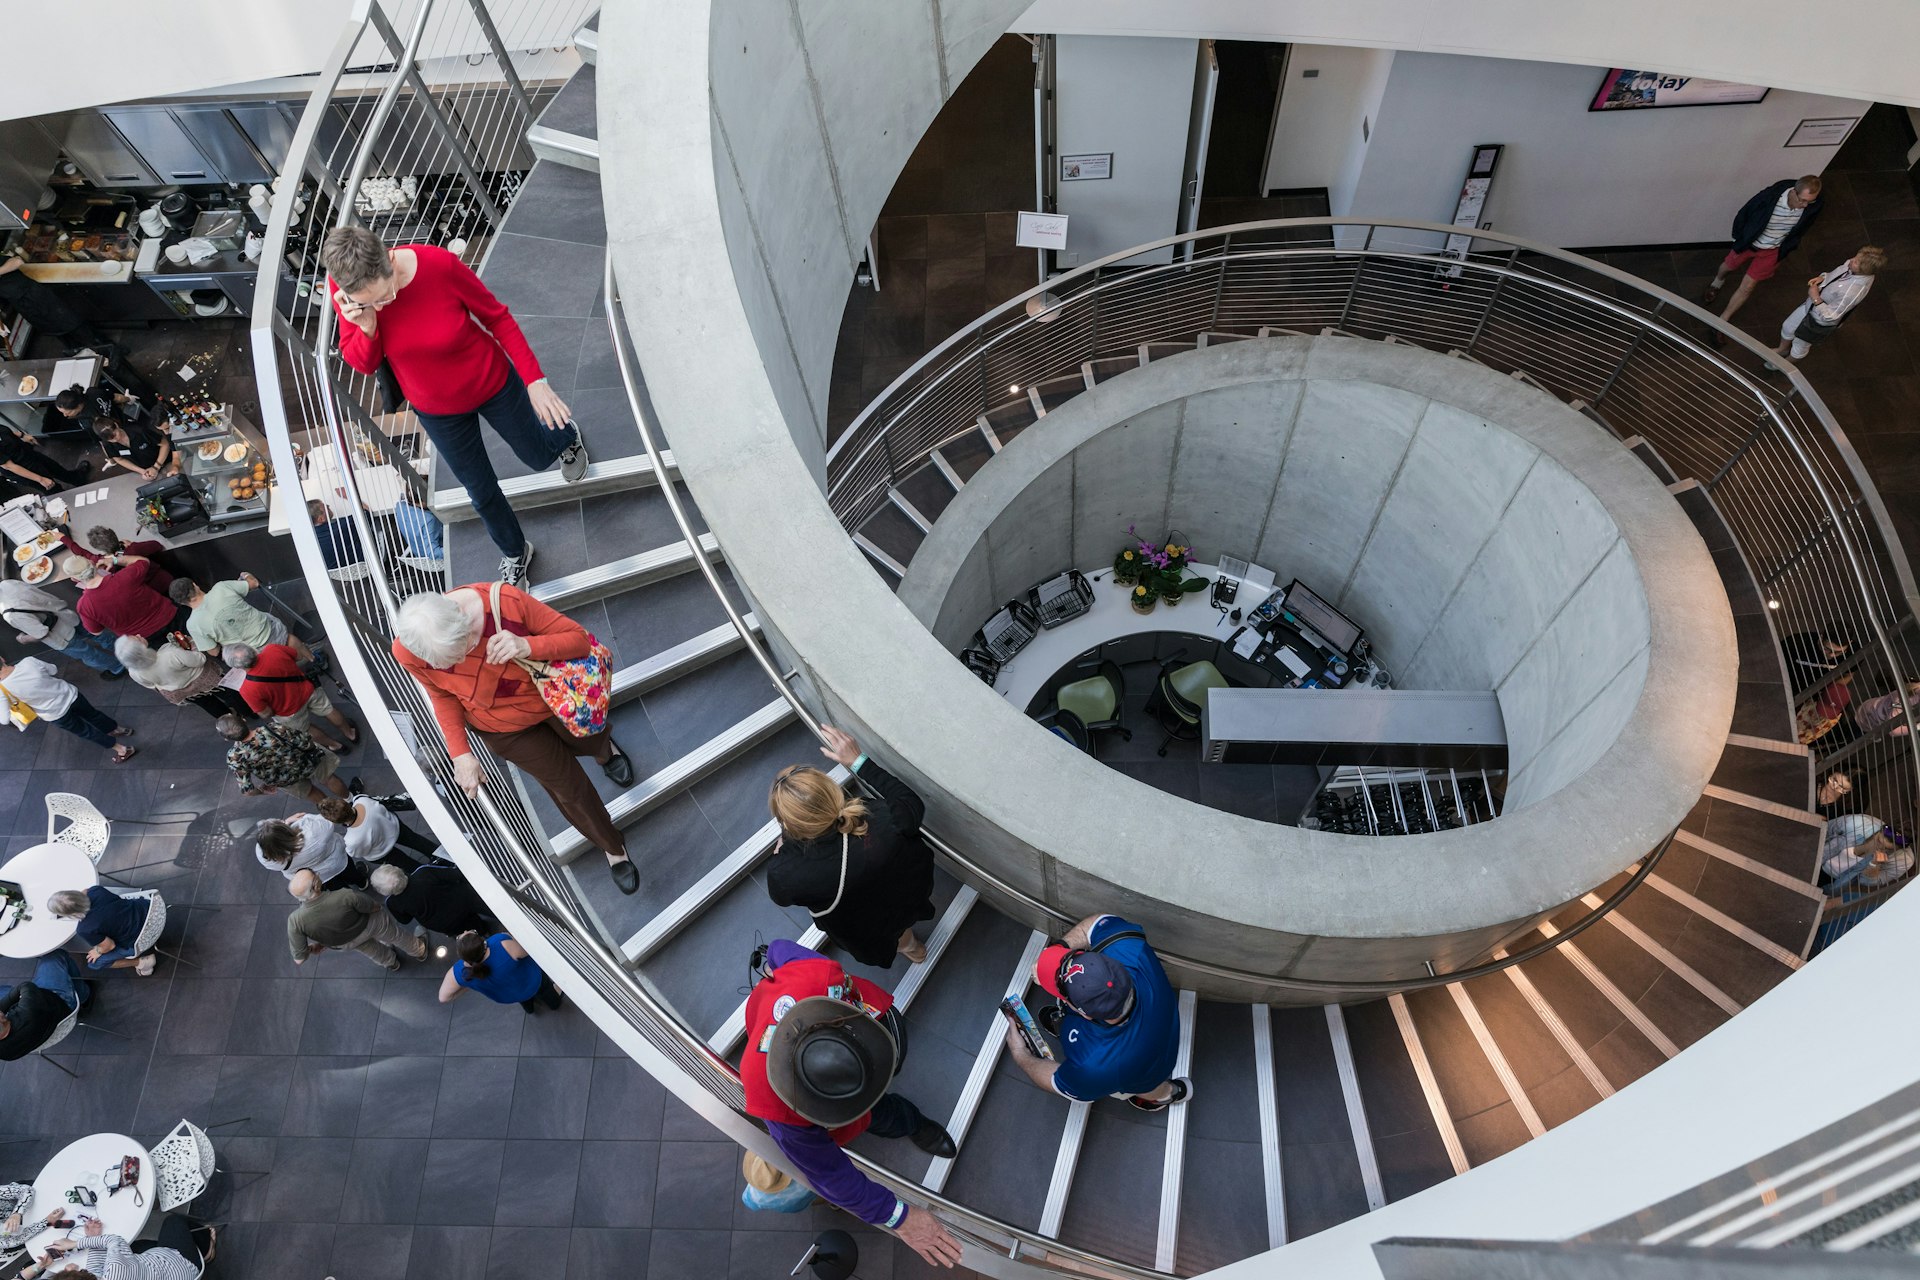 Museum attendees descend a spiral staircase